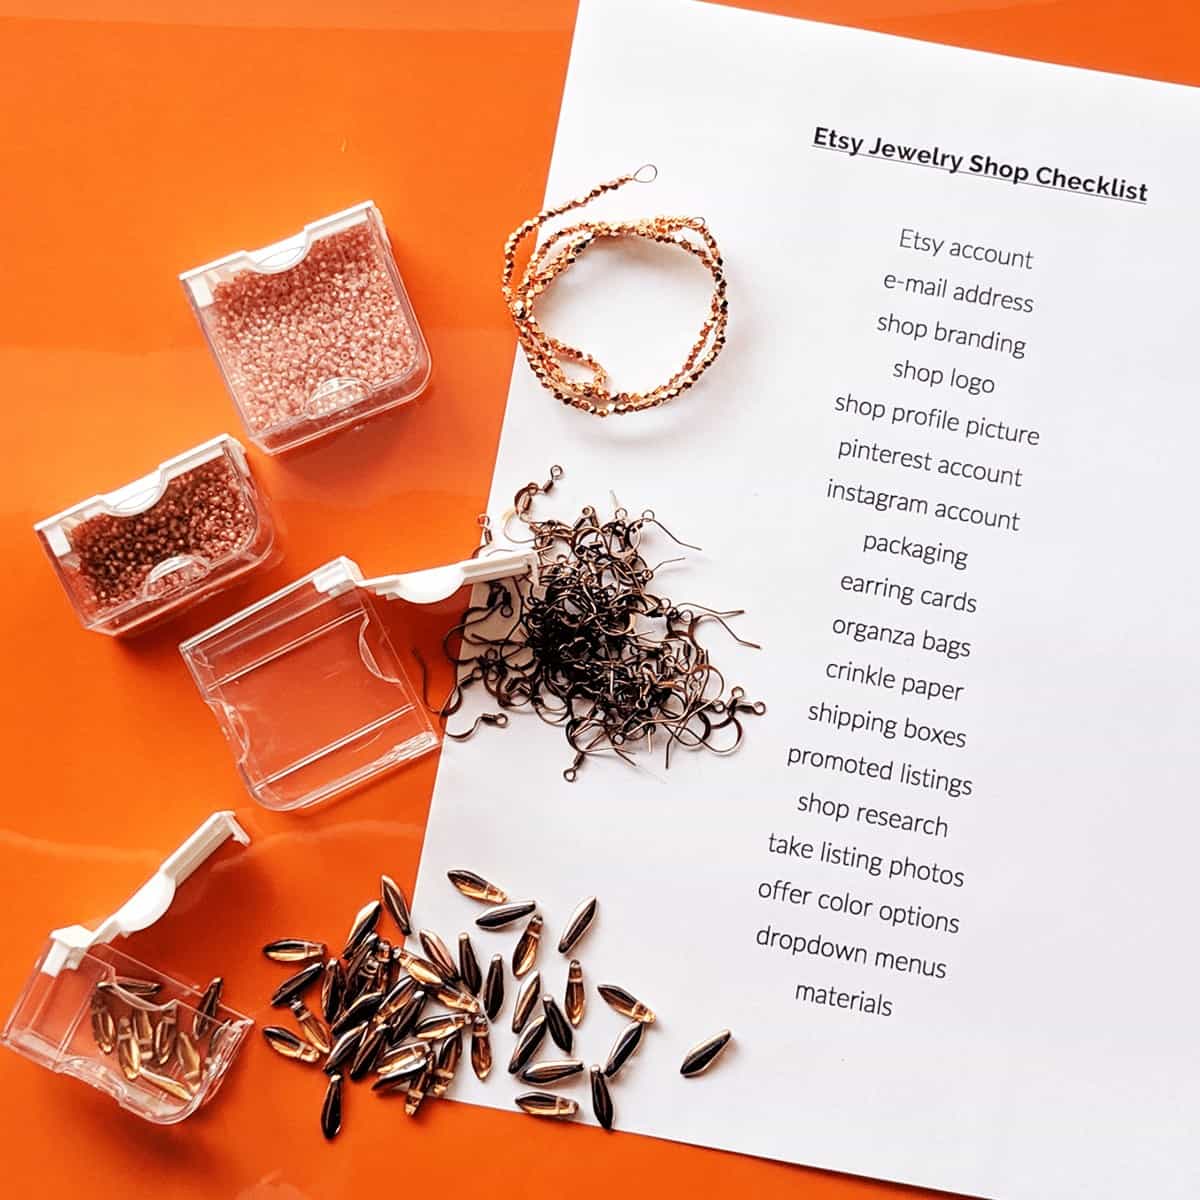 Should You Open An Etsy Shop To Sell Your Jewelry?